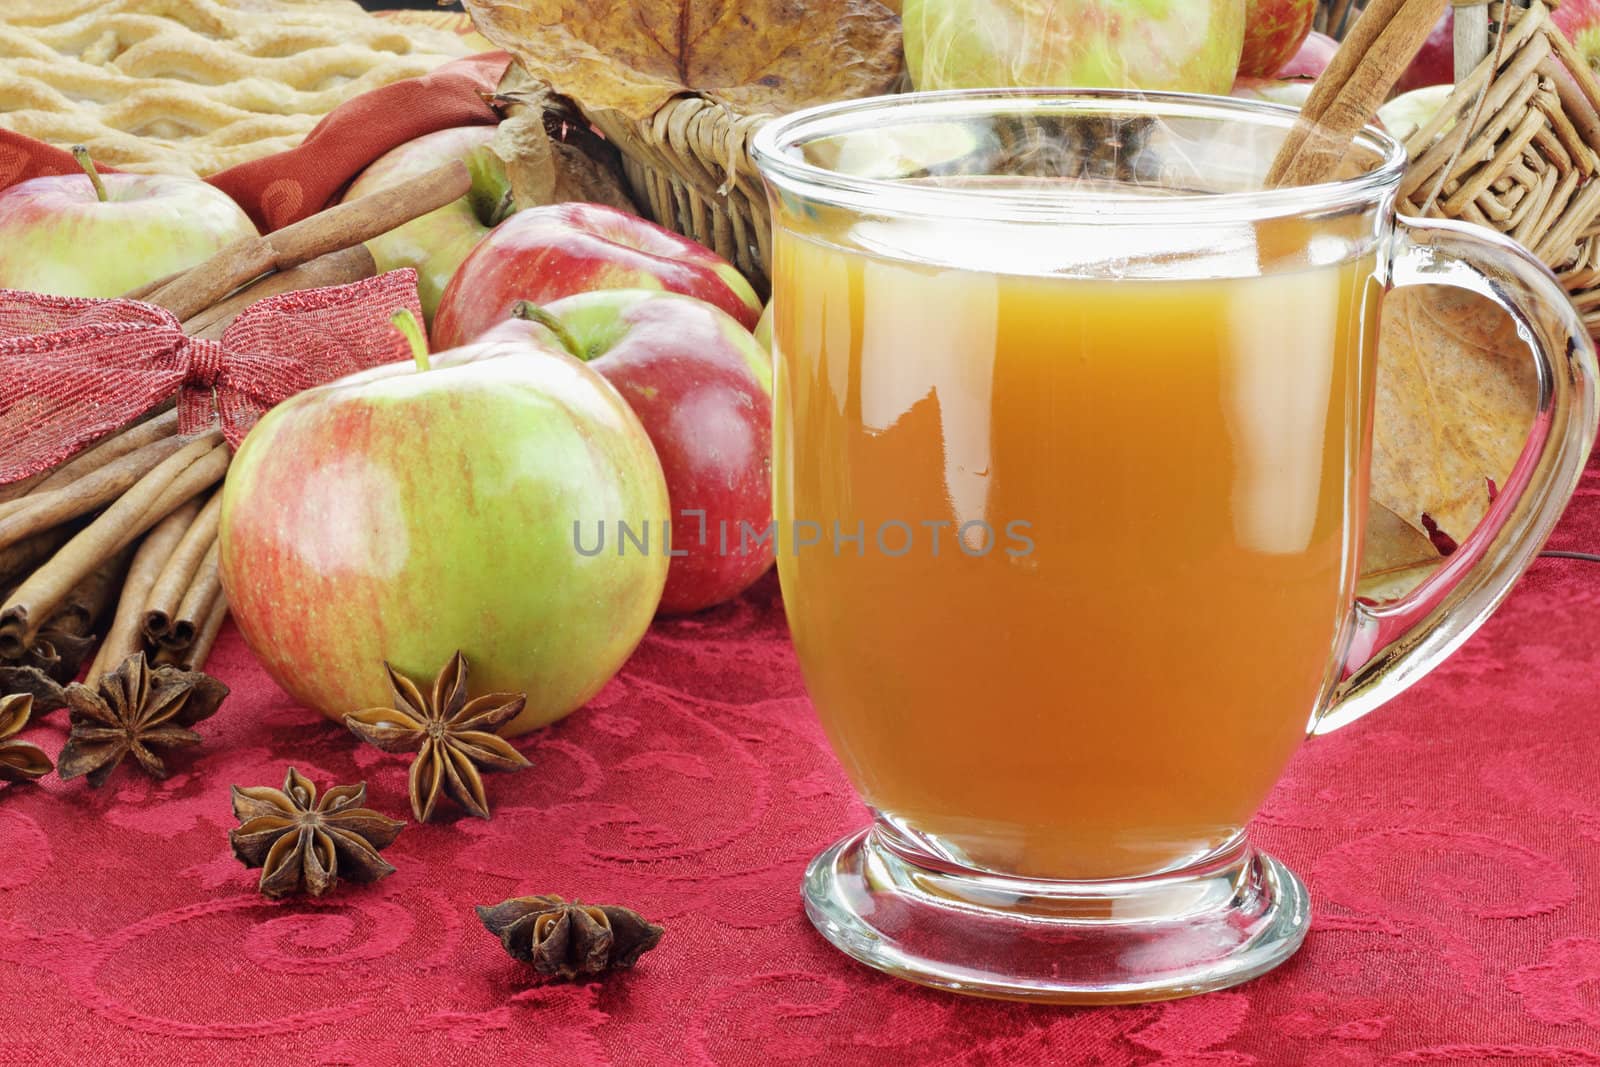 Hot apple cider with cinnamon bark, anise stars and fresh apples. Shallow depth of field with selective focus on cider.
